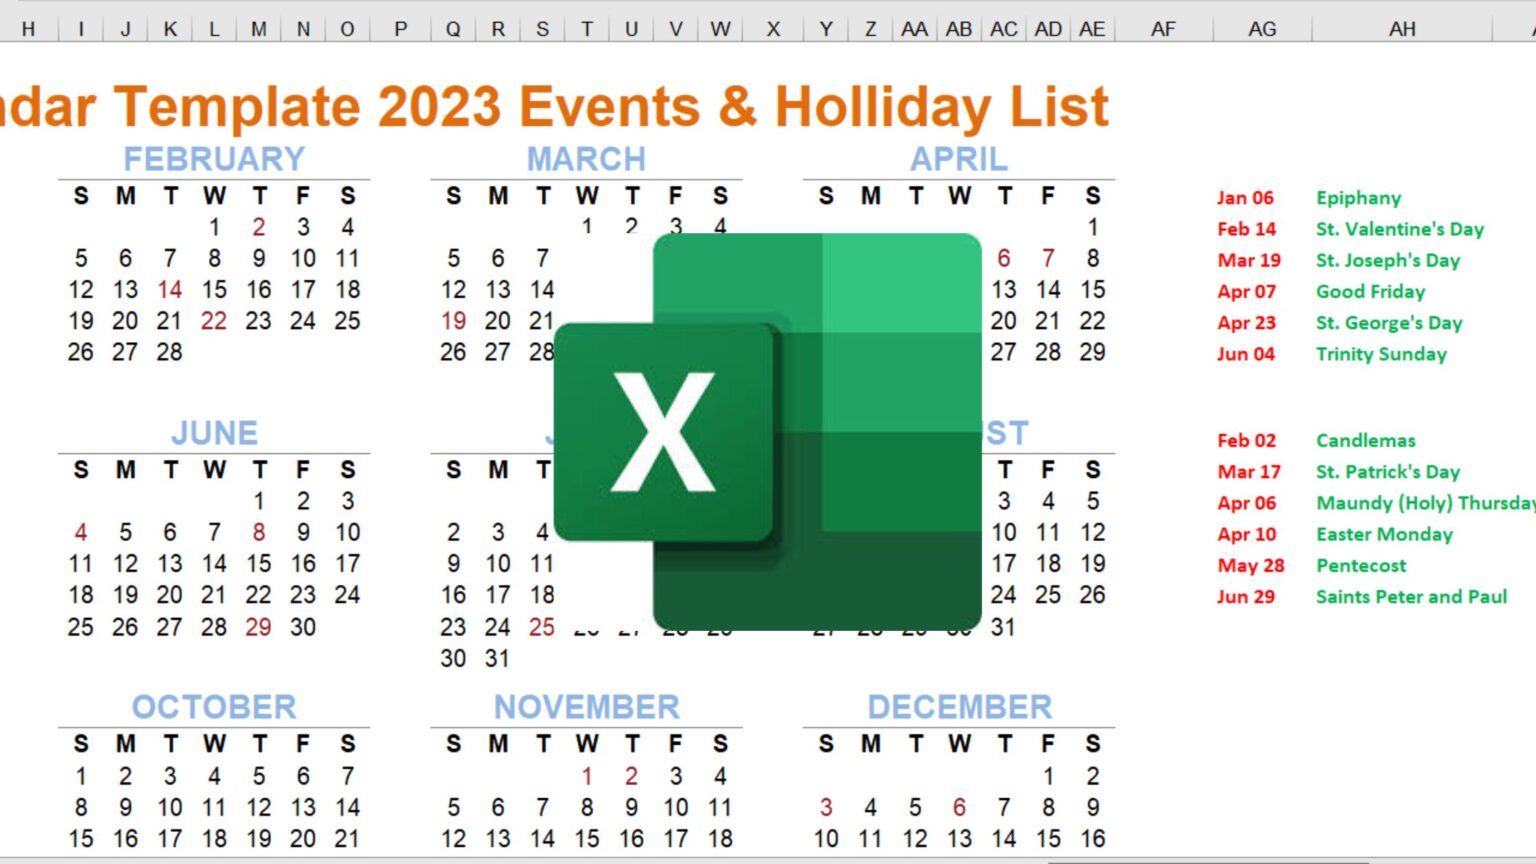 Download Printable Excel Calendar Template 2023 With Events And Holiday